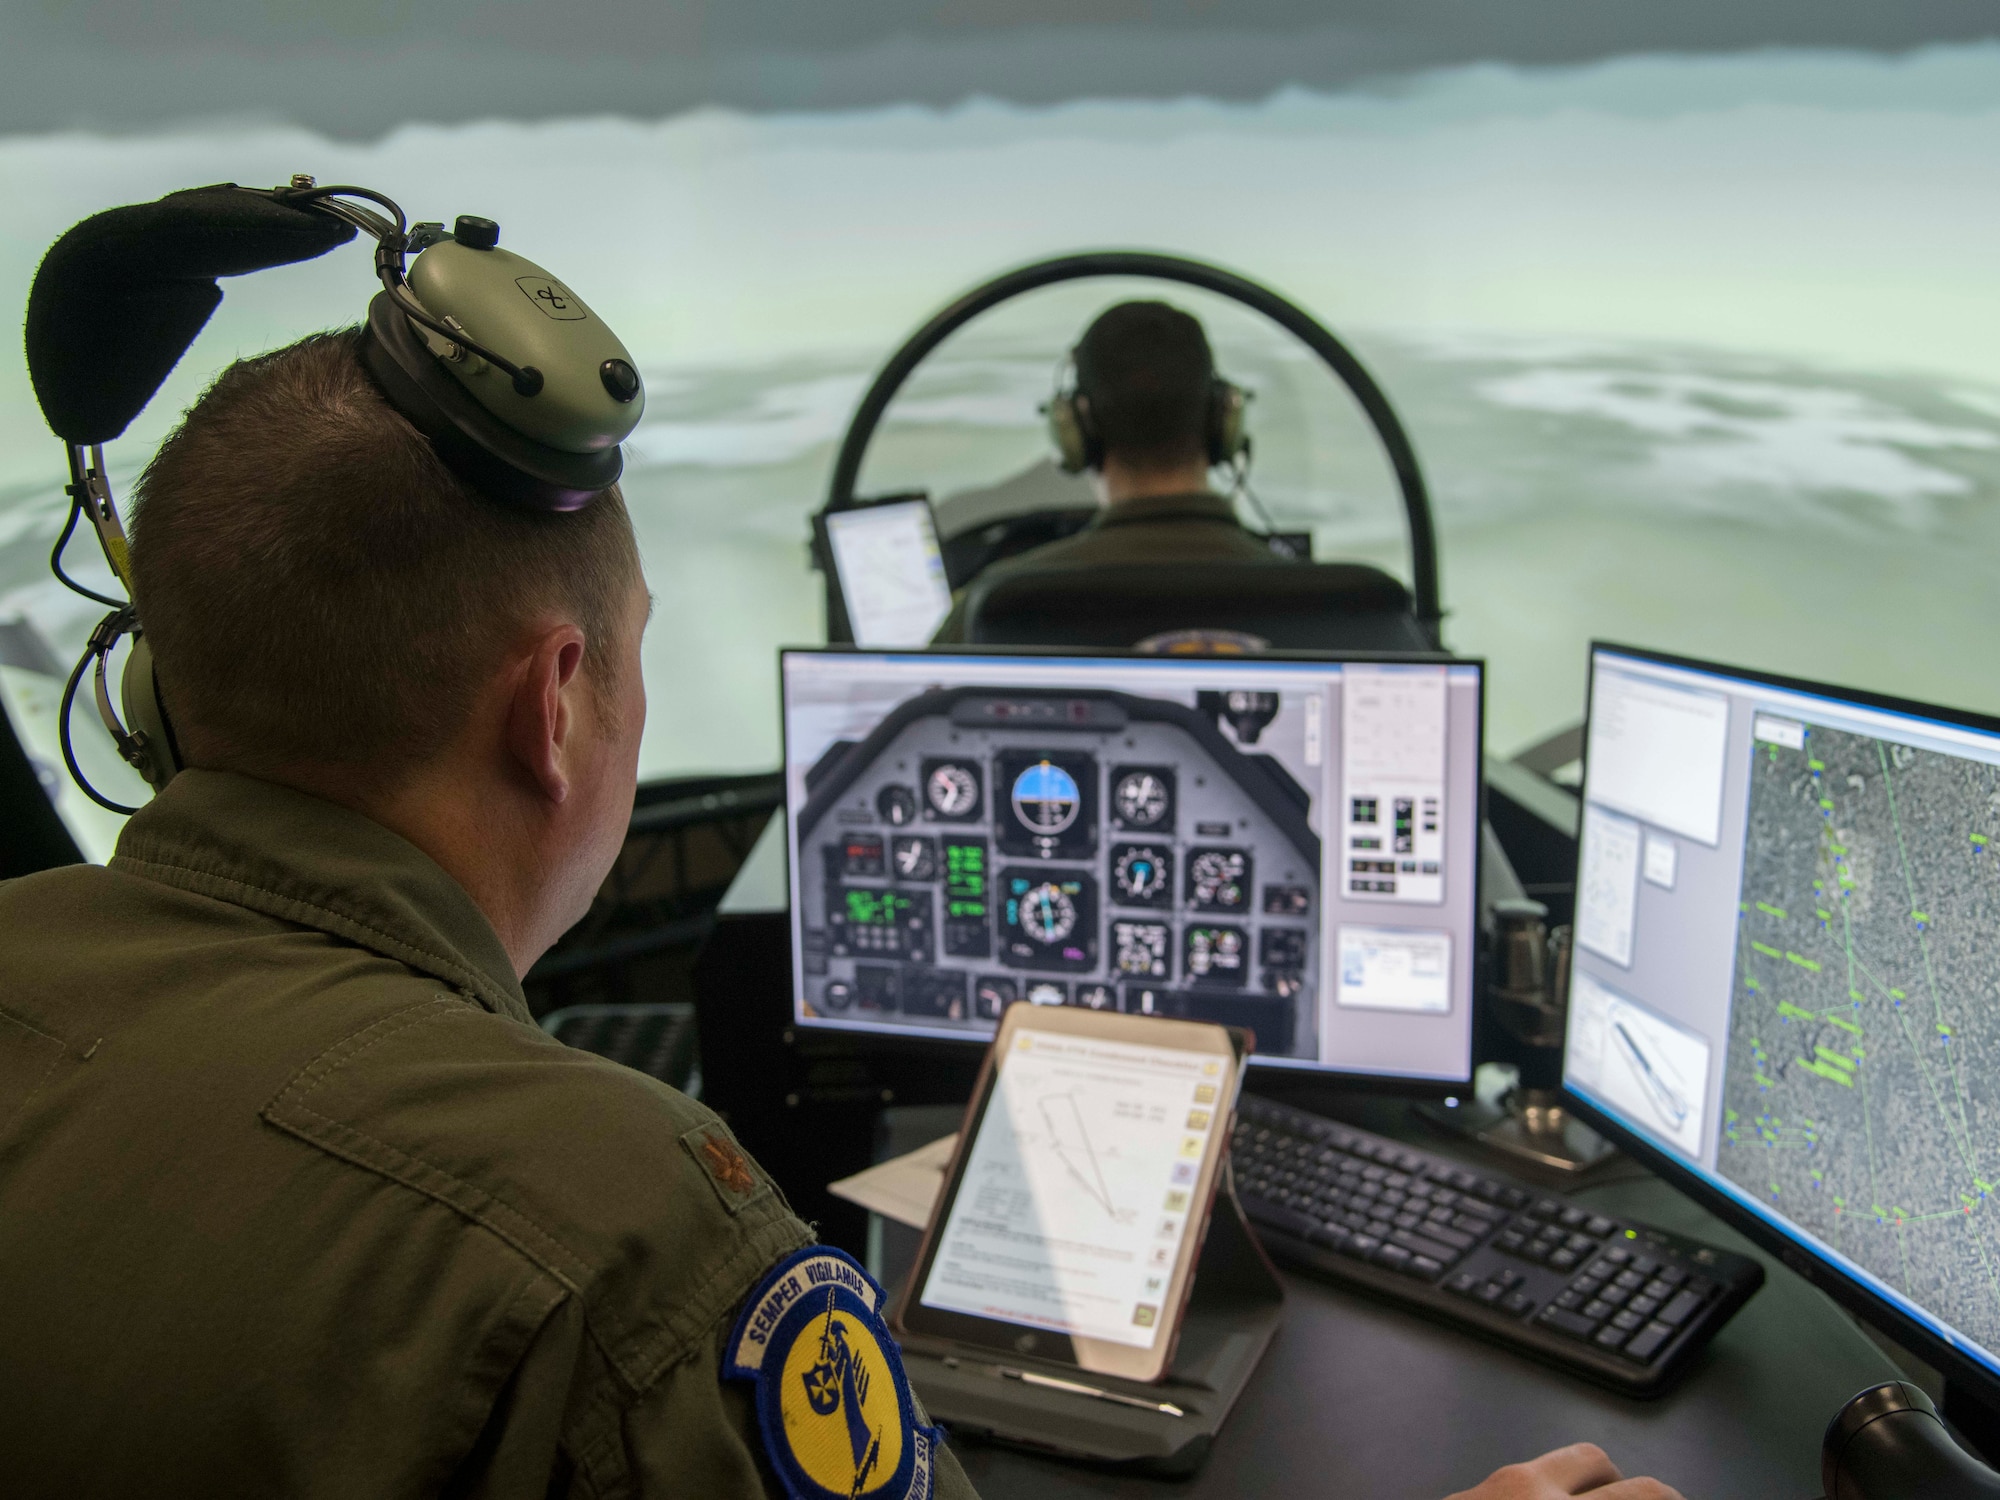 An instructor pilot sits at a console with two monitors that depict cockpit instruments on the left screen and a map of Randolph Air Force Base on the right. Directly infront of him is a simulator cockpit occupied by a student pilot.